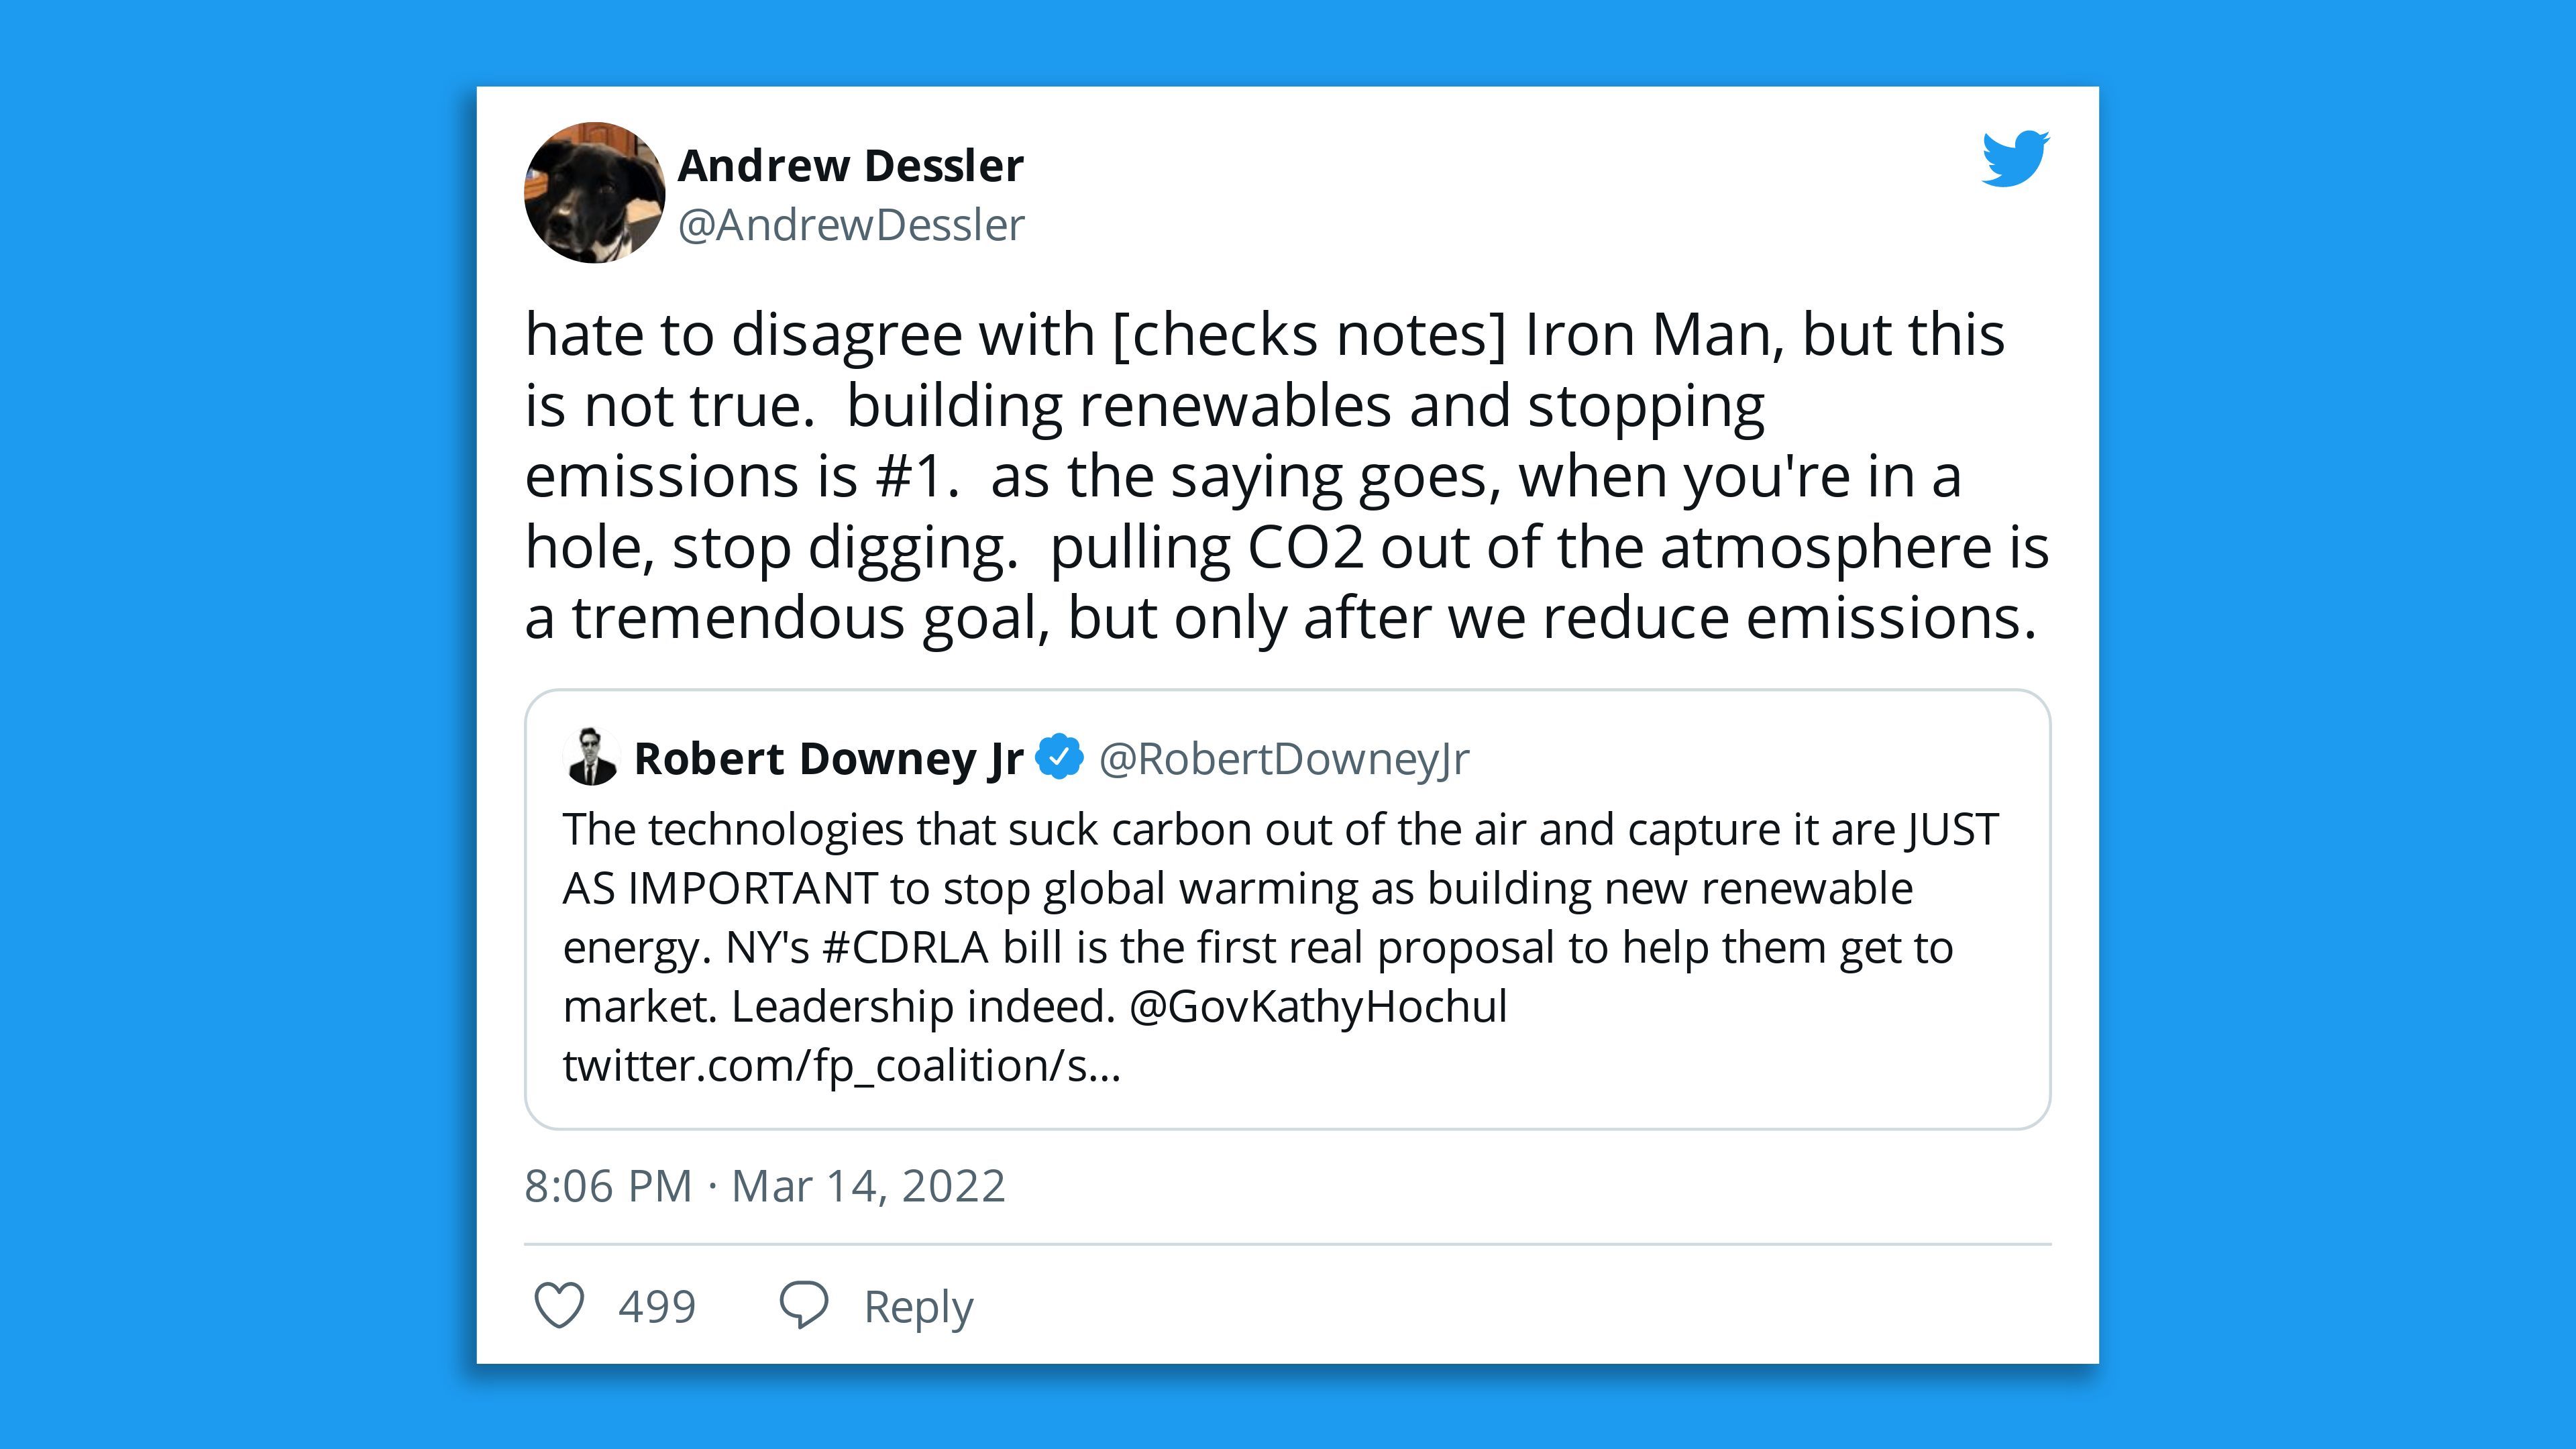 Screenshot of tweet from climate scientist Andrew Dessler disagreeing over carbon removal with Robert Downey Jr.